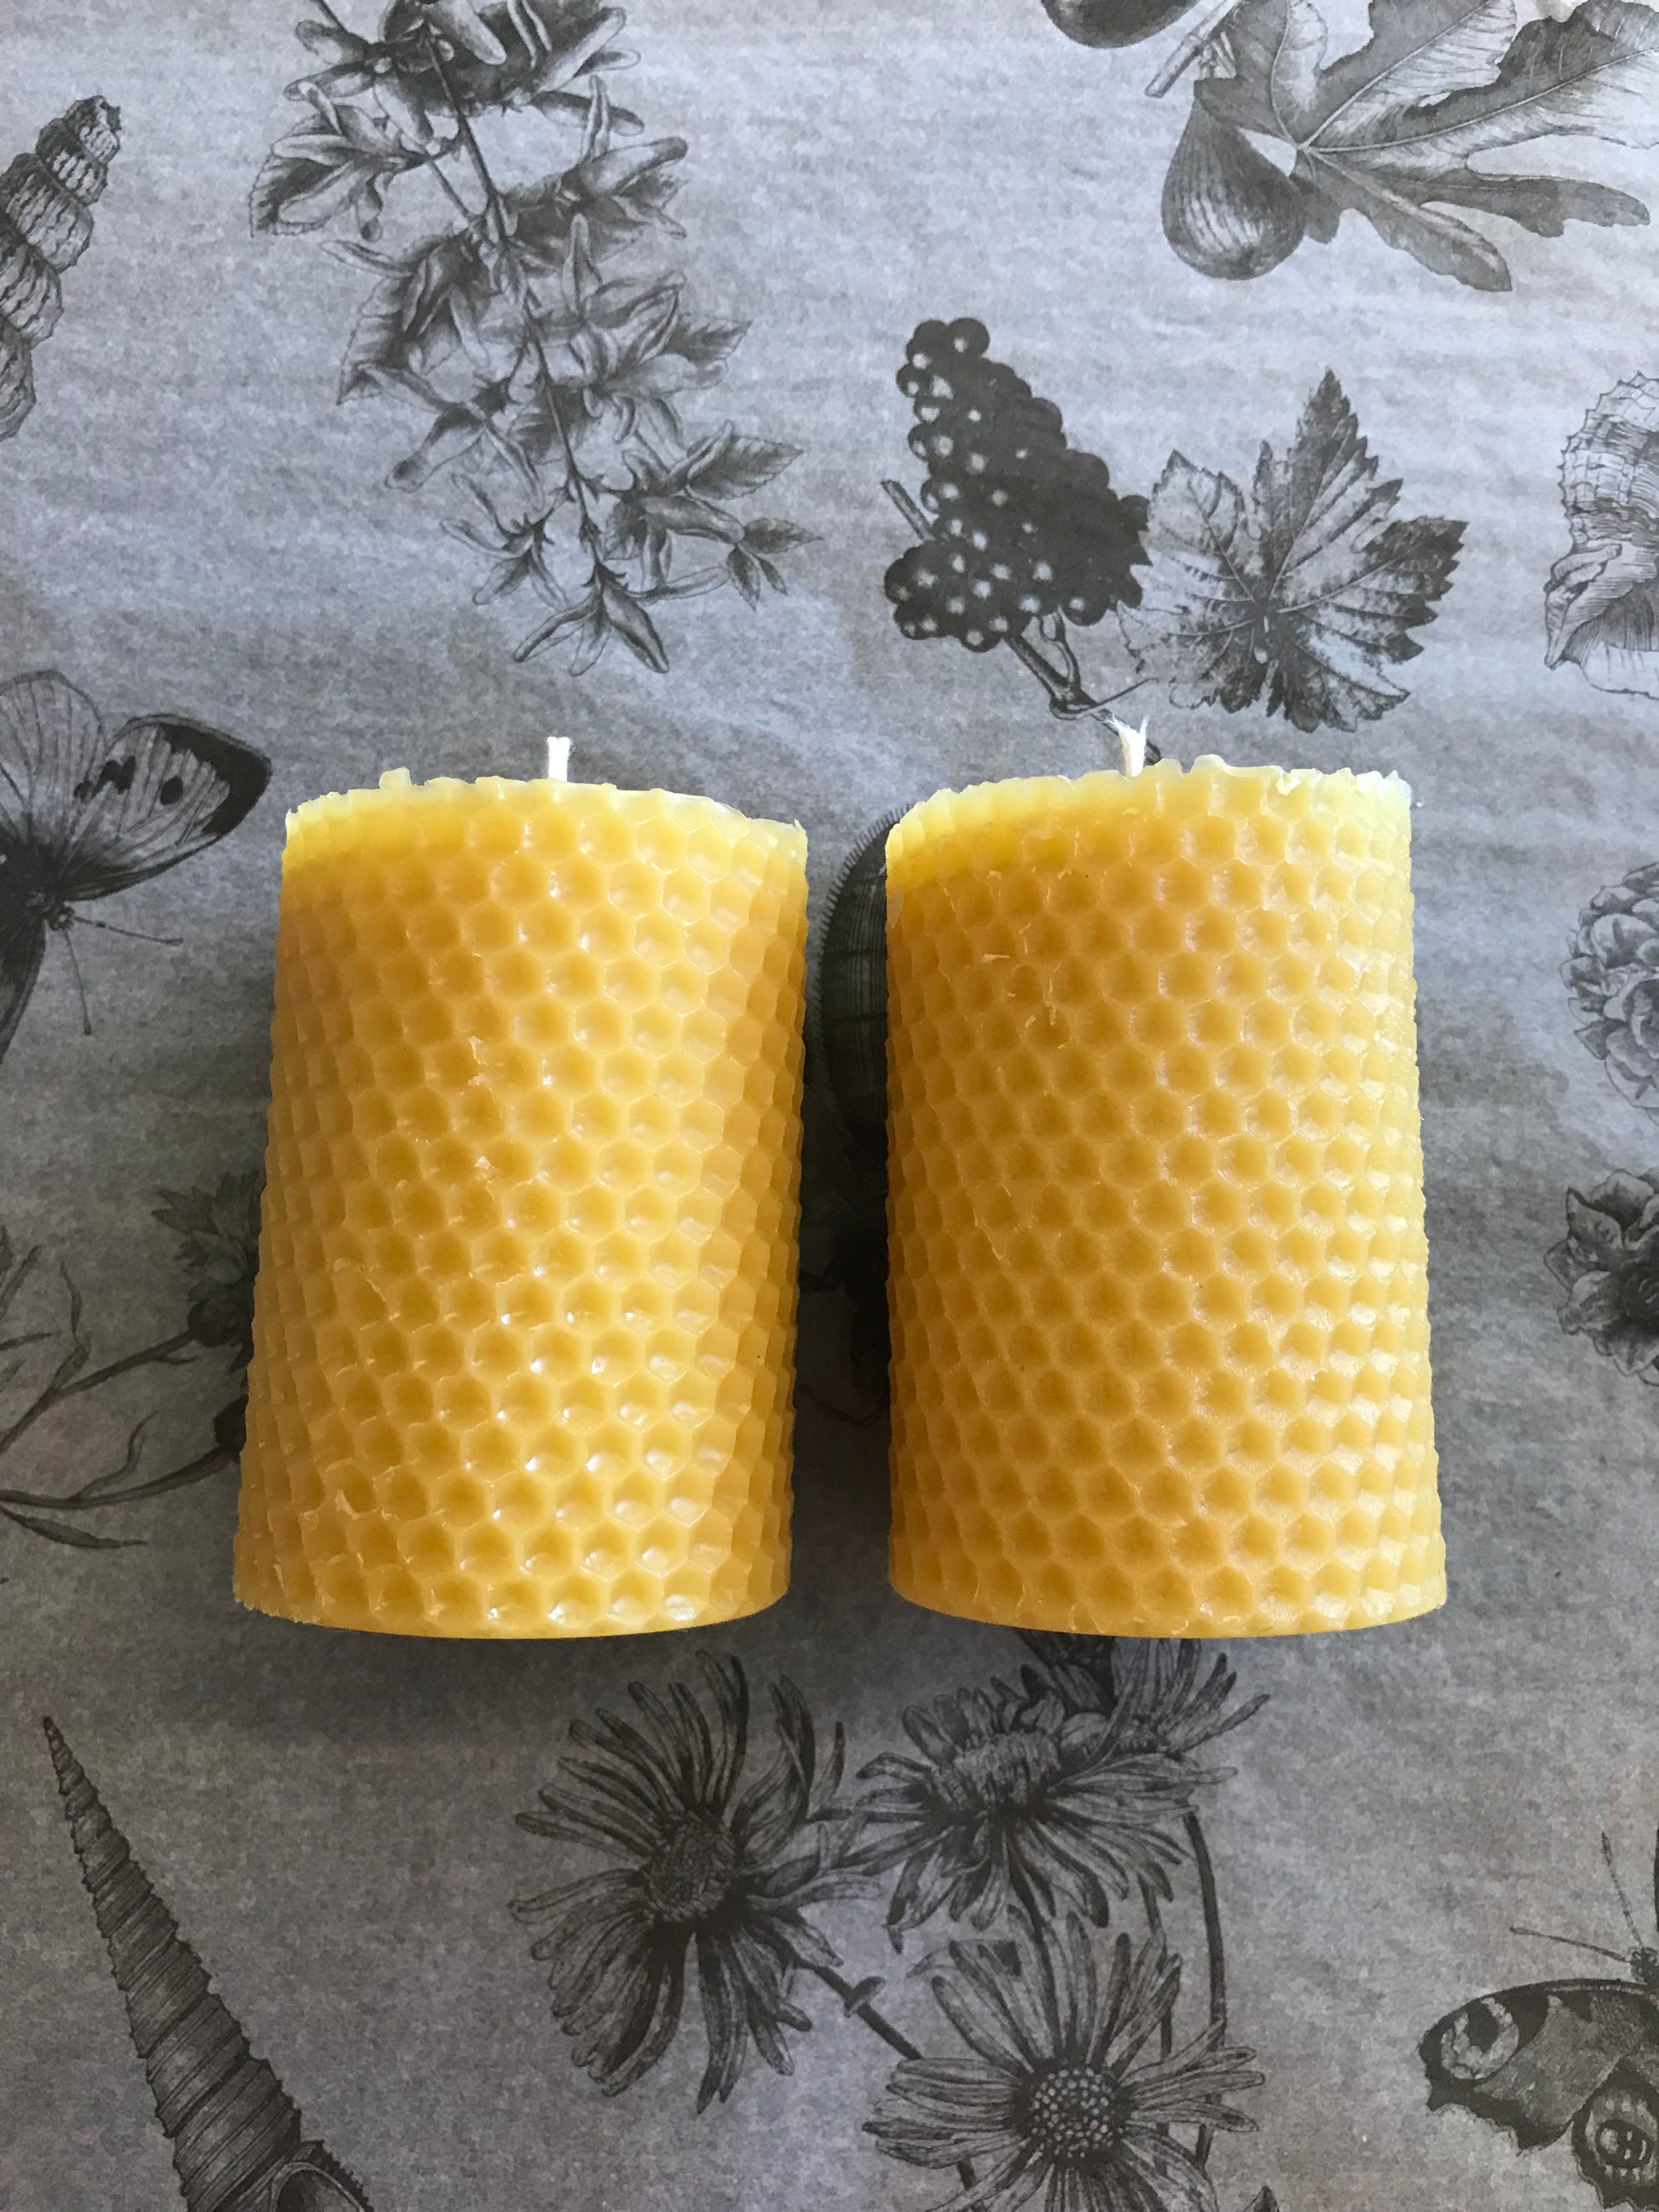 3 Inch Wide Beeswax Pillar Candles - Beverly Bees